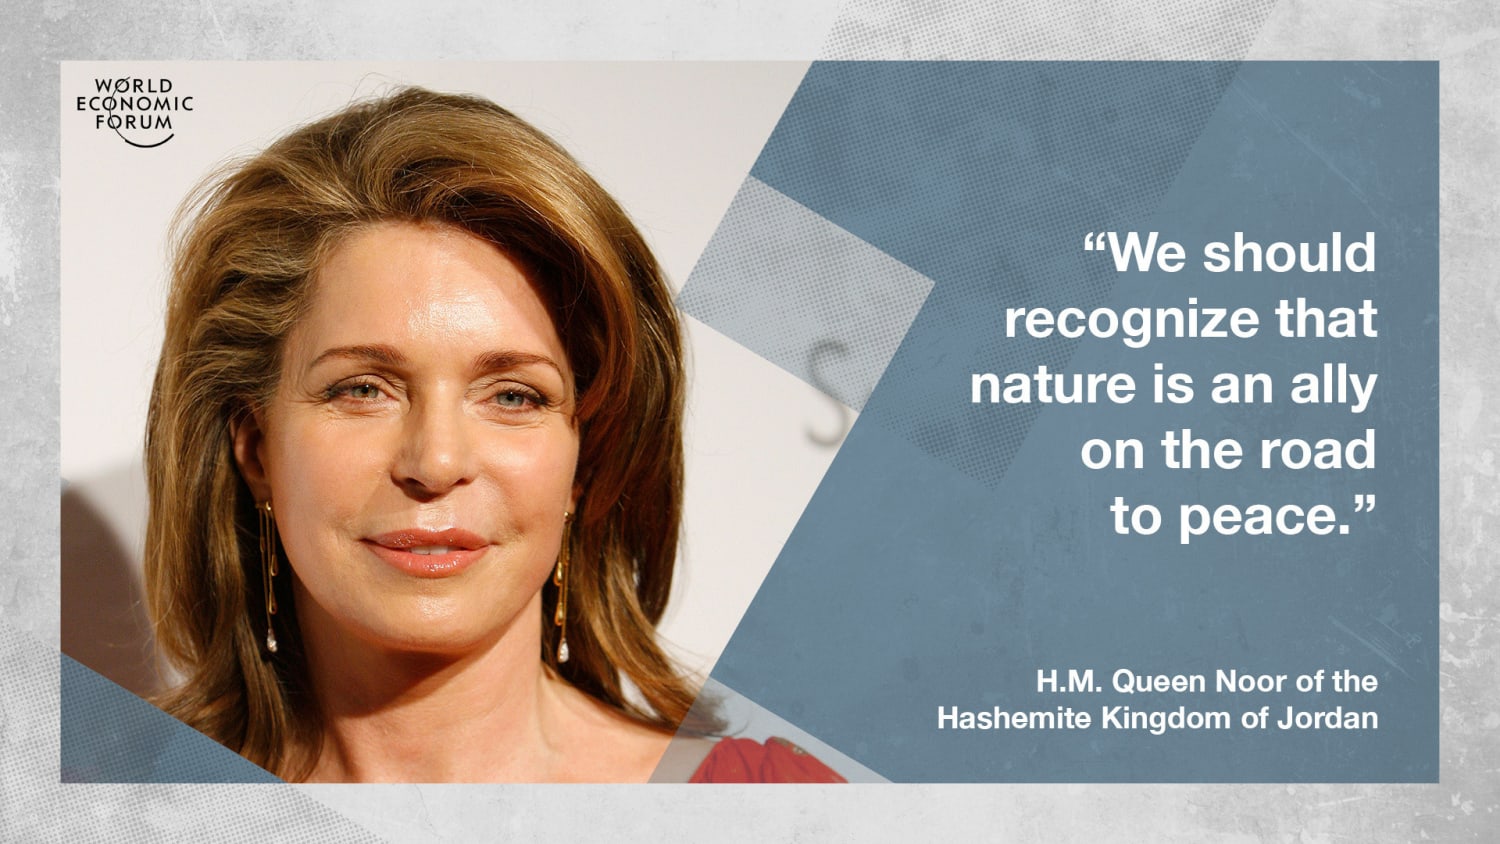 Quotes on the future of our ocean from Queen Noor of Jordan, Marc Benioff and more